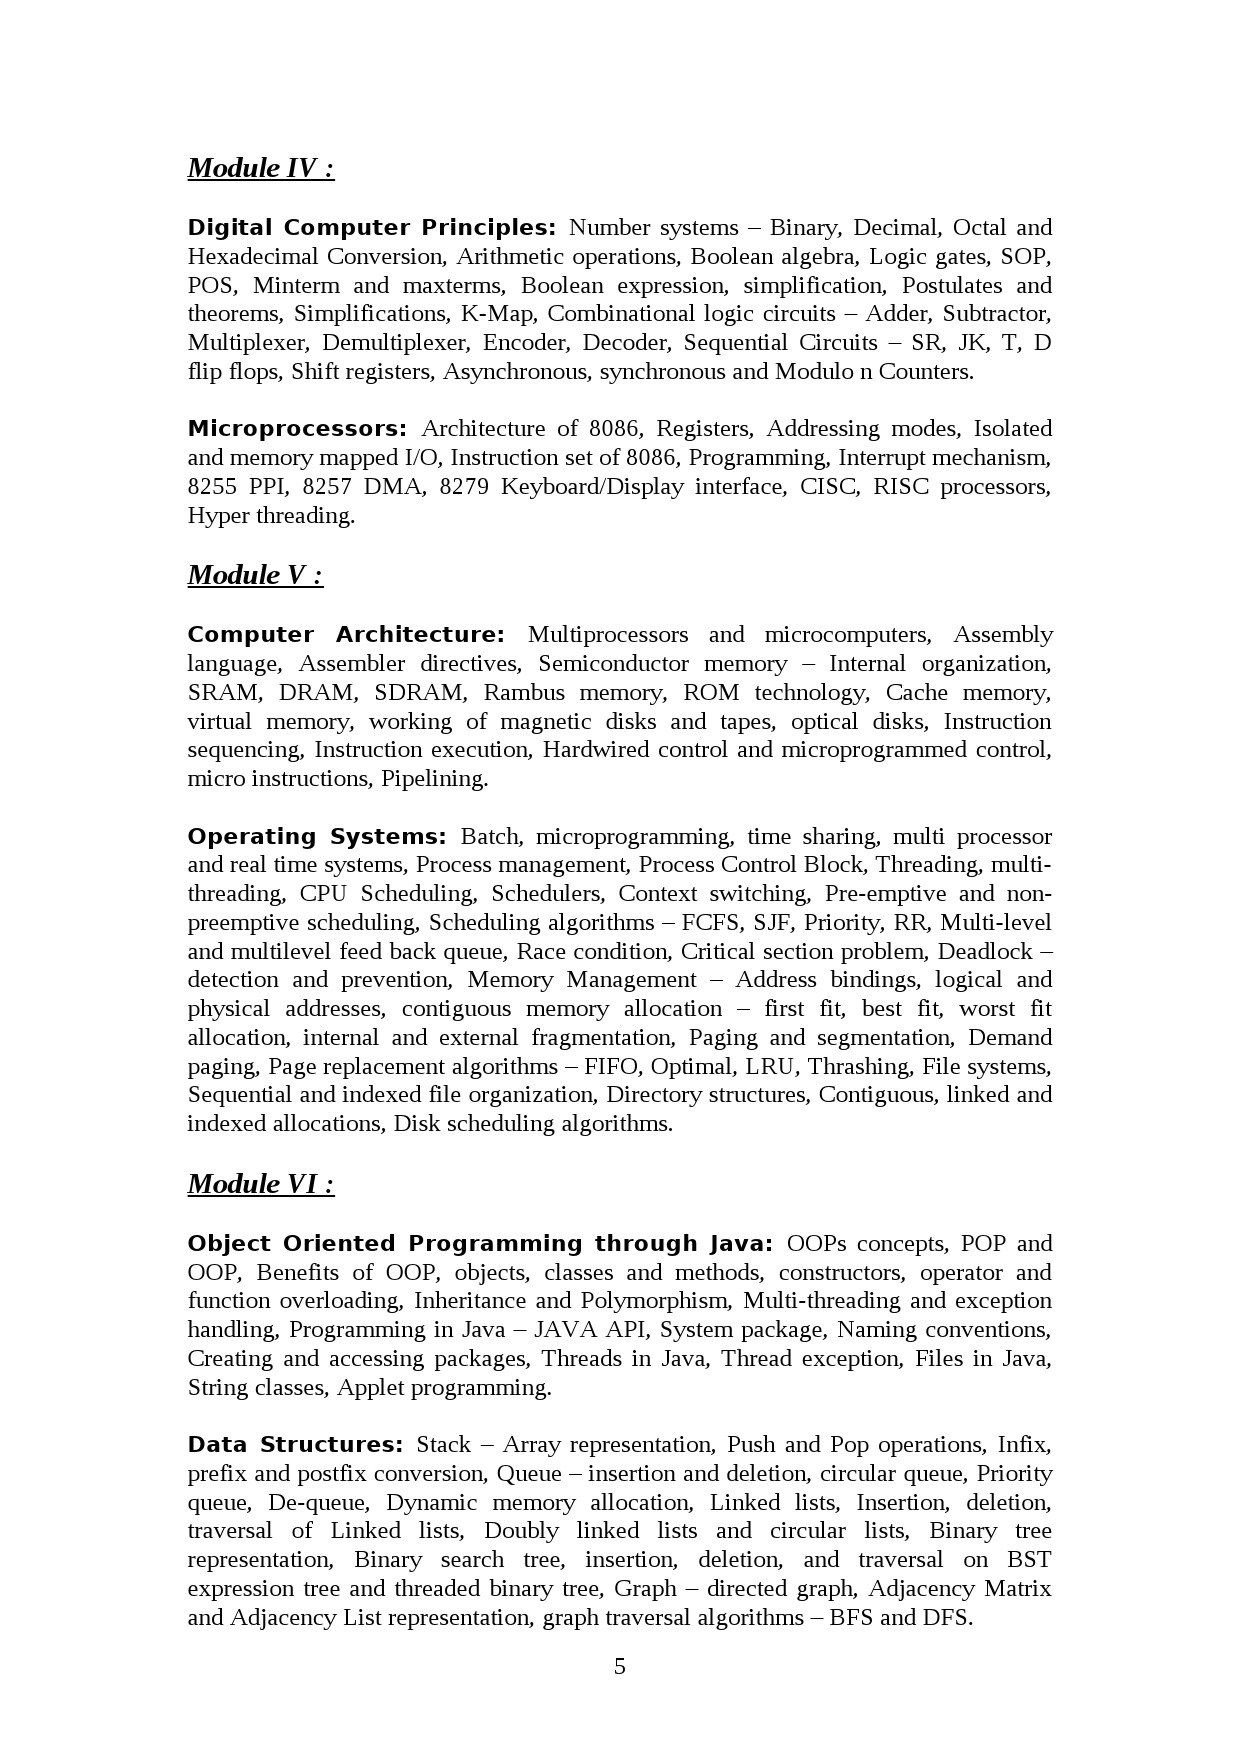 Computer Engineering Lecturer in Polytechnic Exam Syllabus - Notification Image 5